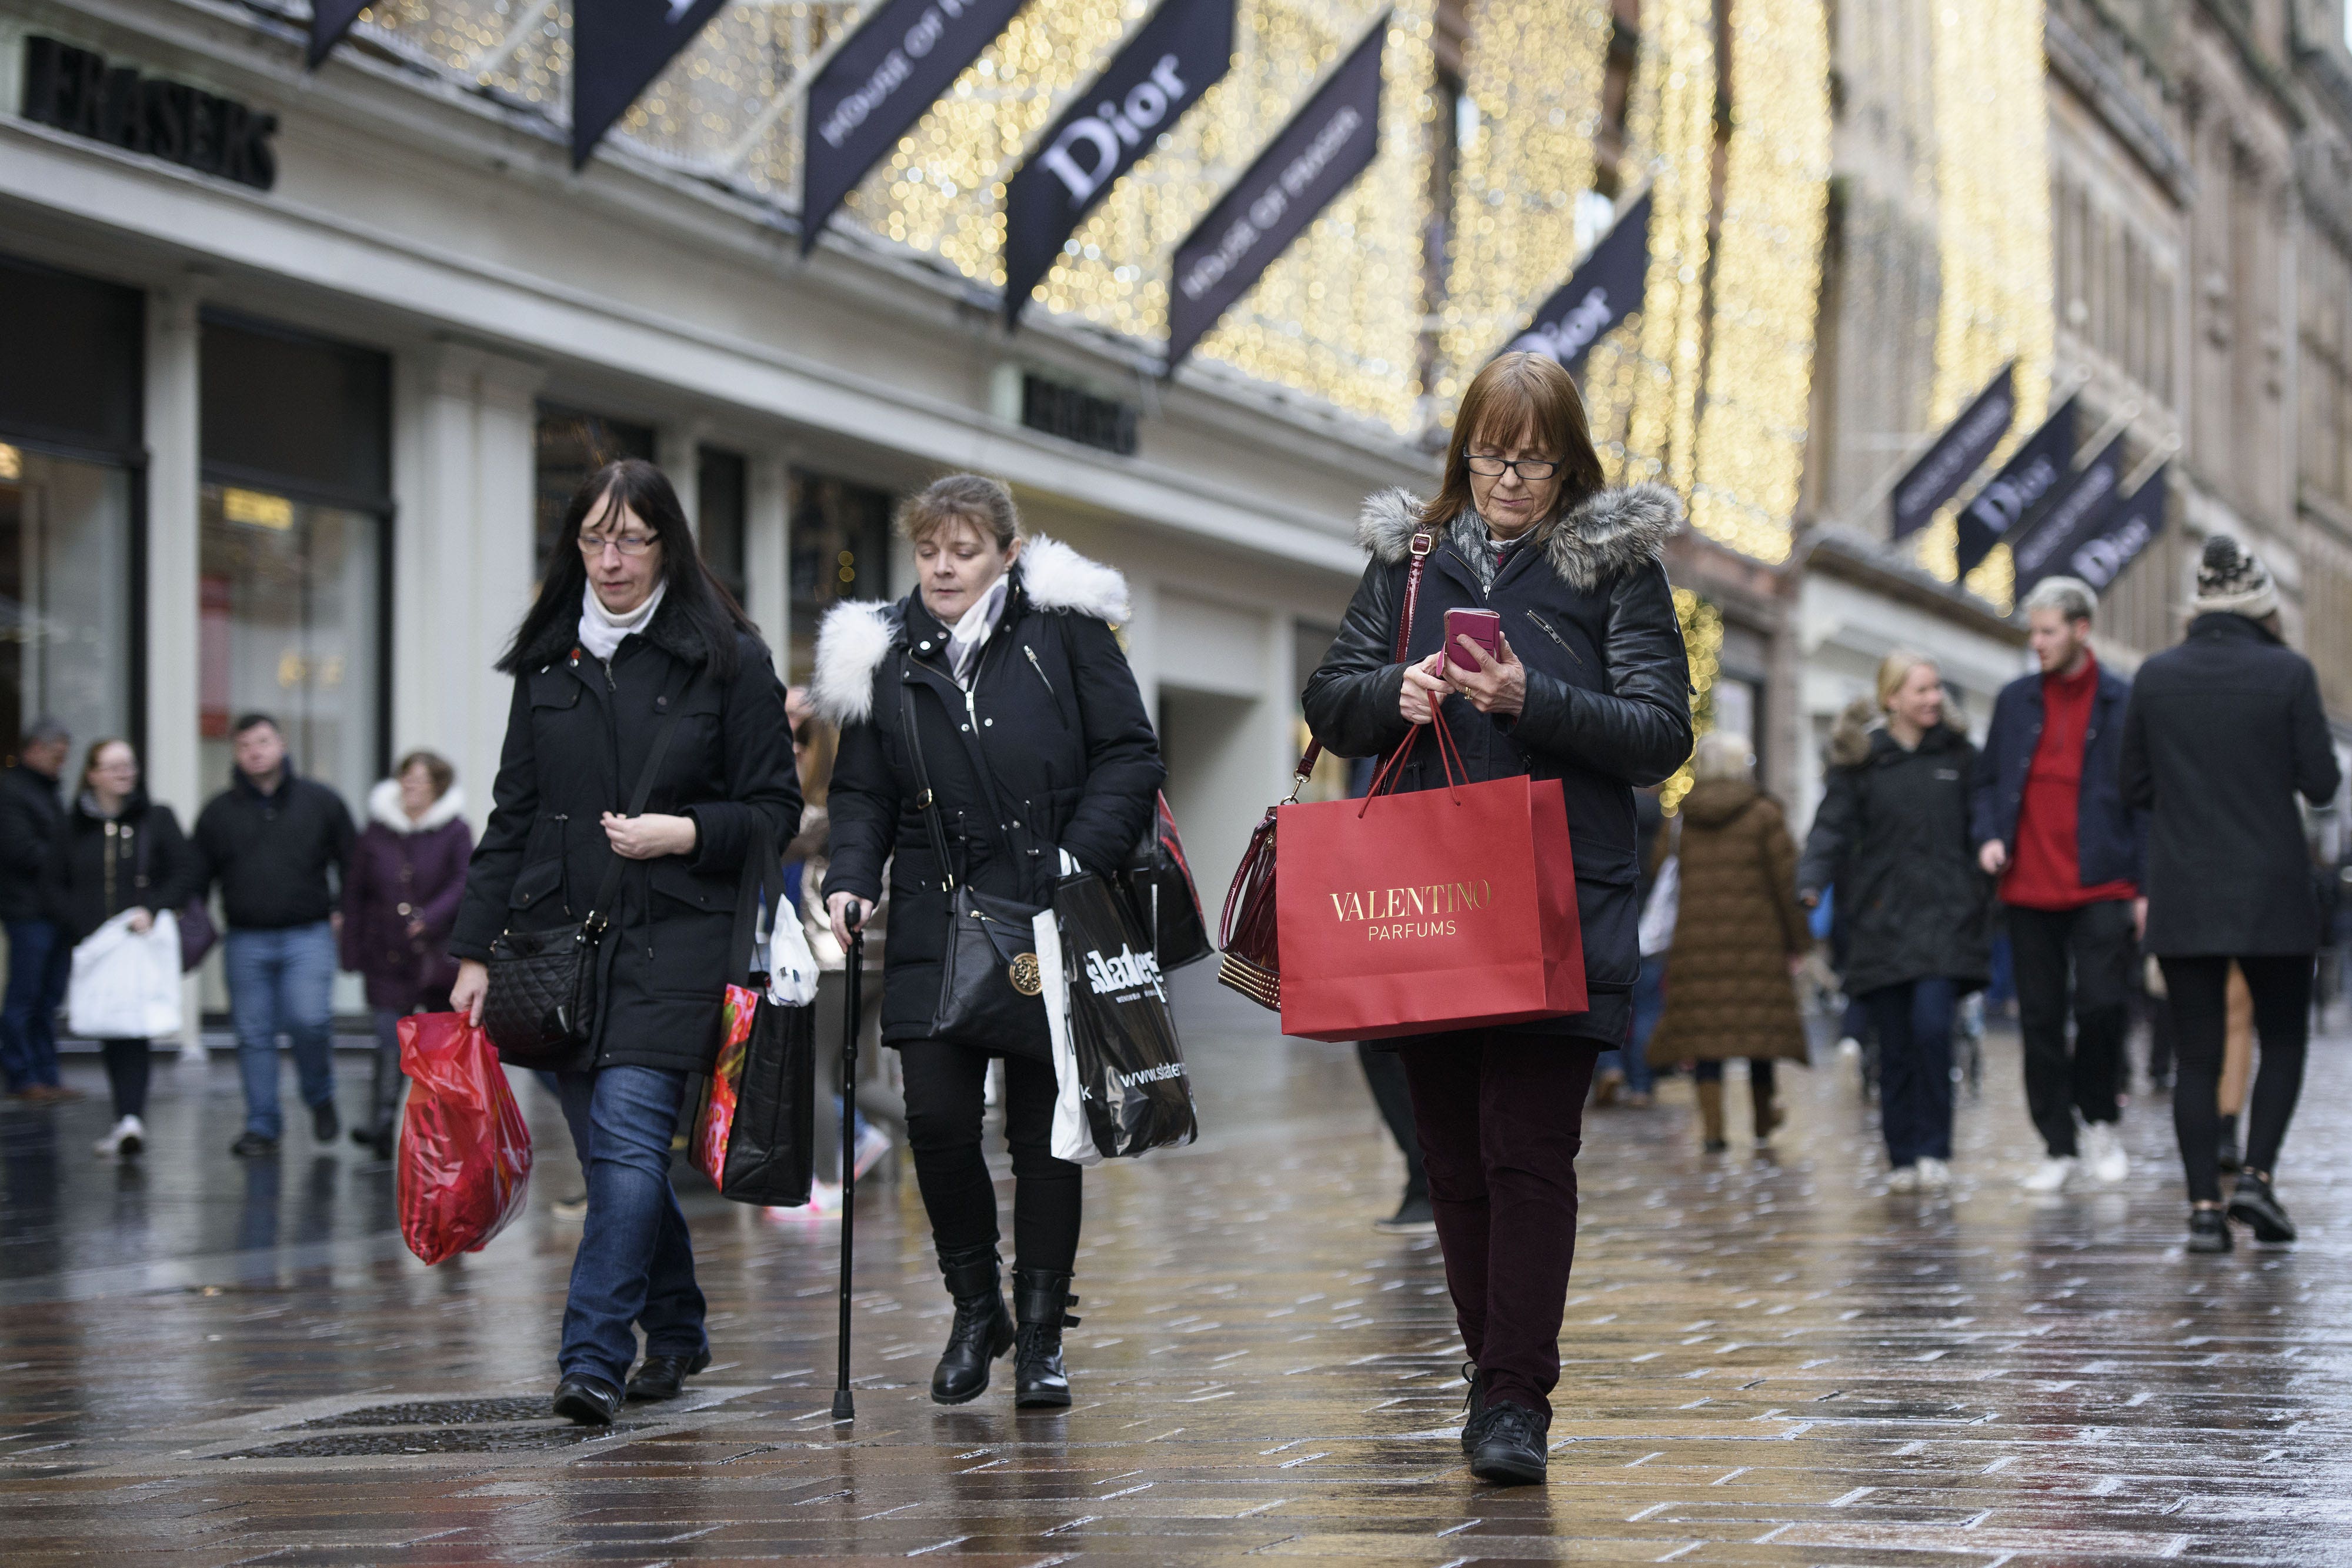 Shoppers have been cautious because of the cost-of-living crisis (John Linton/PA)